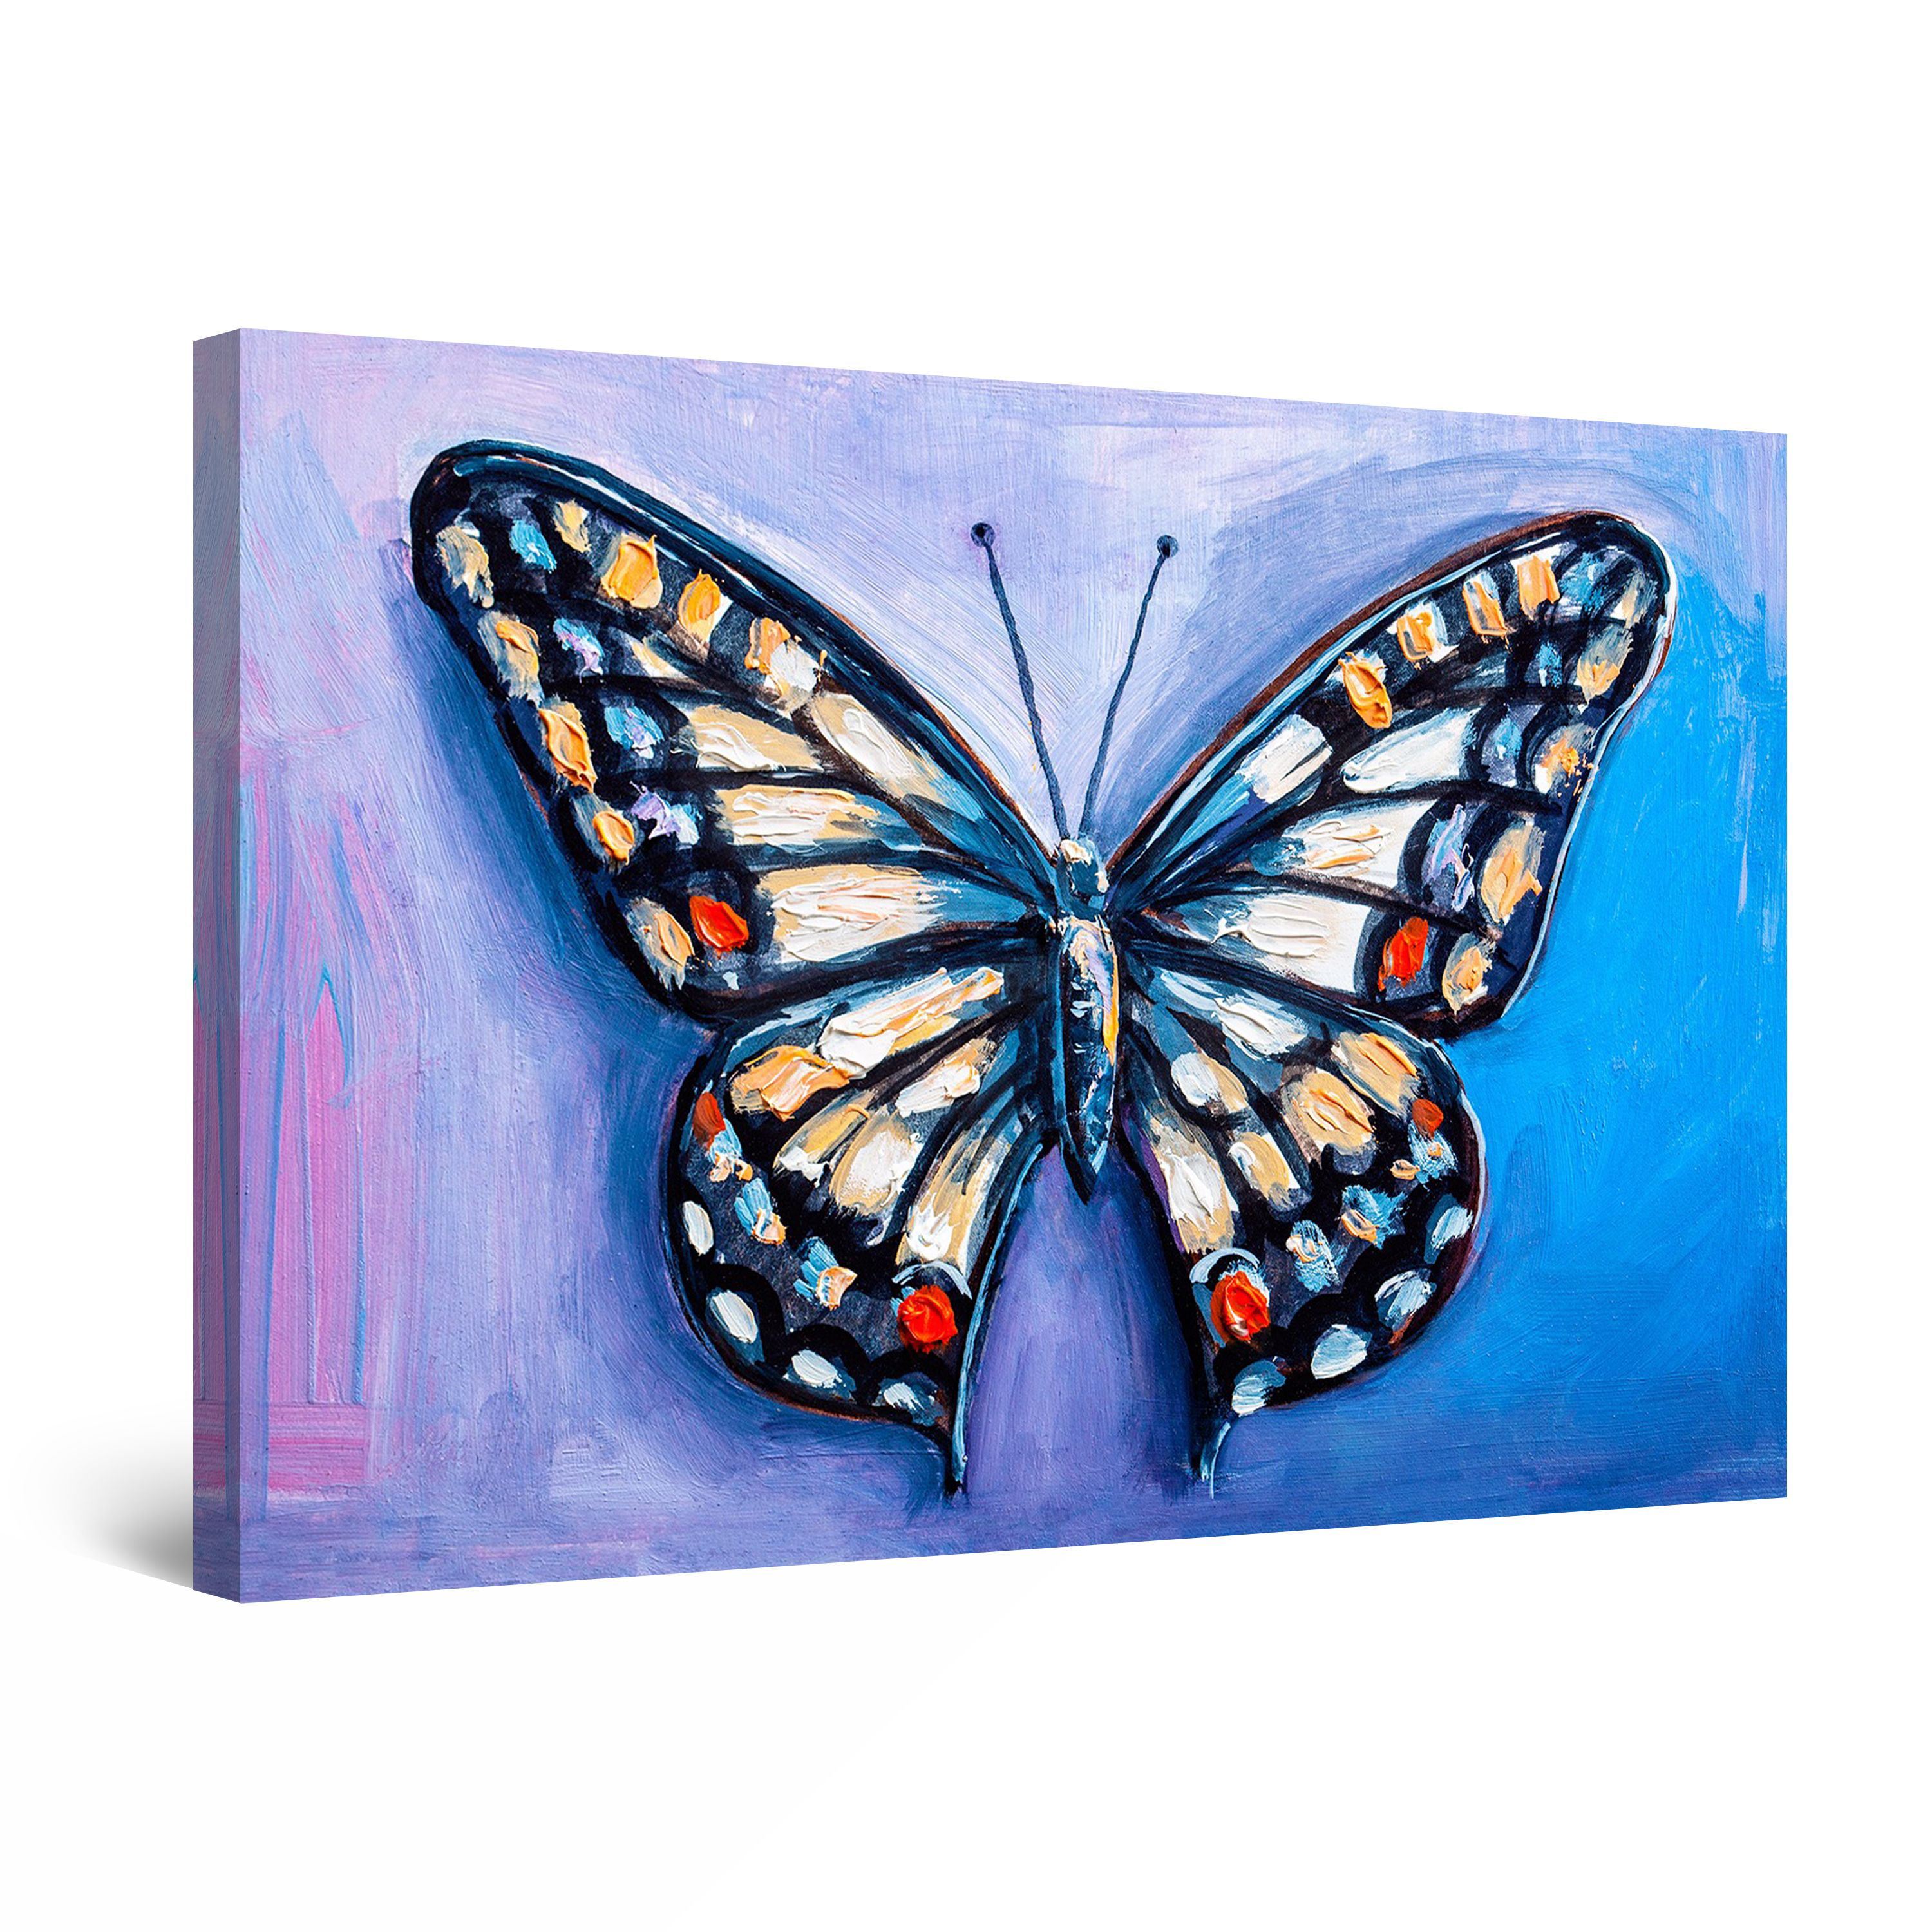 Startonight Canvas Wall Art Abstract - Precious Blue Butterfly, Red ...